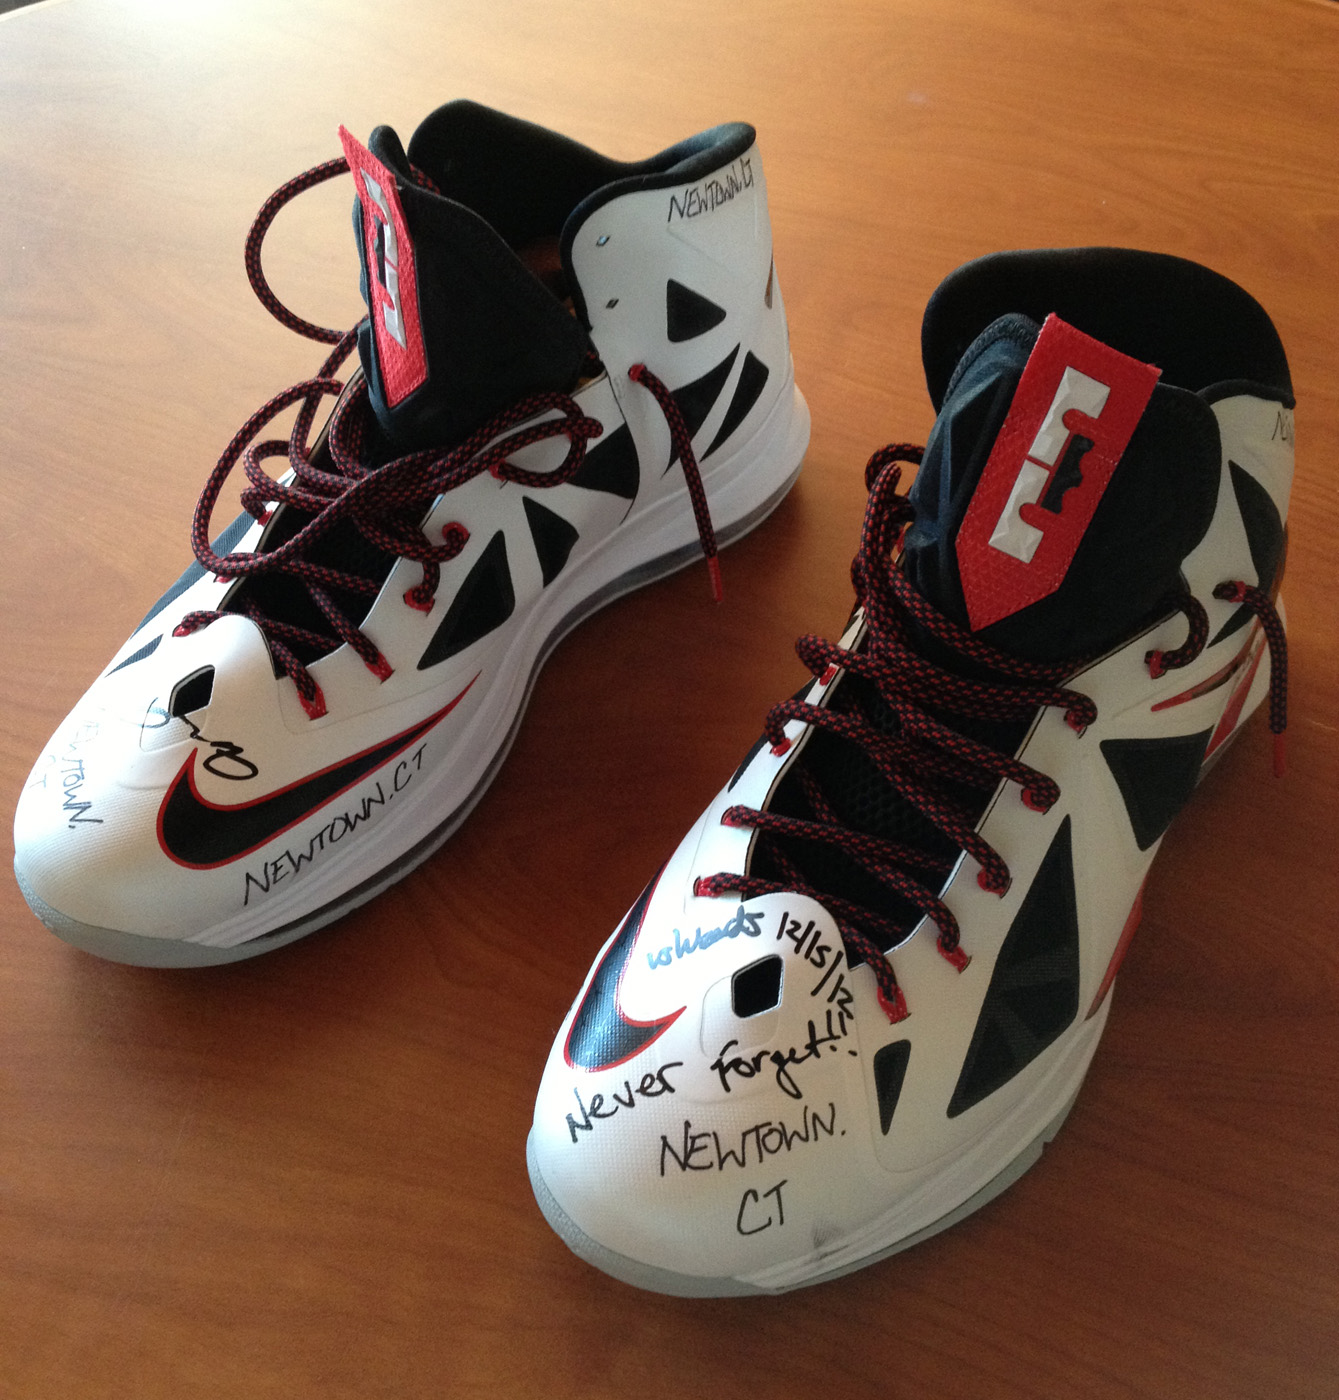 LeBron James Autographed & Inscribed Game-Used Nike LeBron 11 Shoes (vs.  Nuggets 3/14/14)